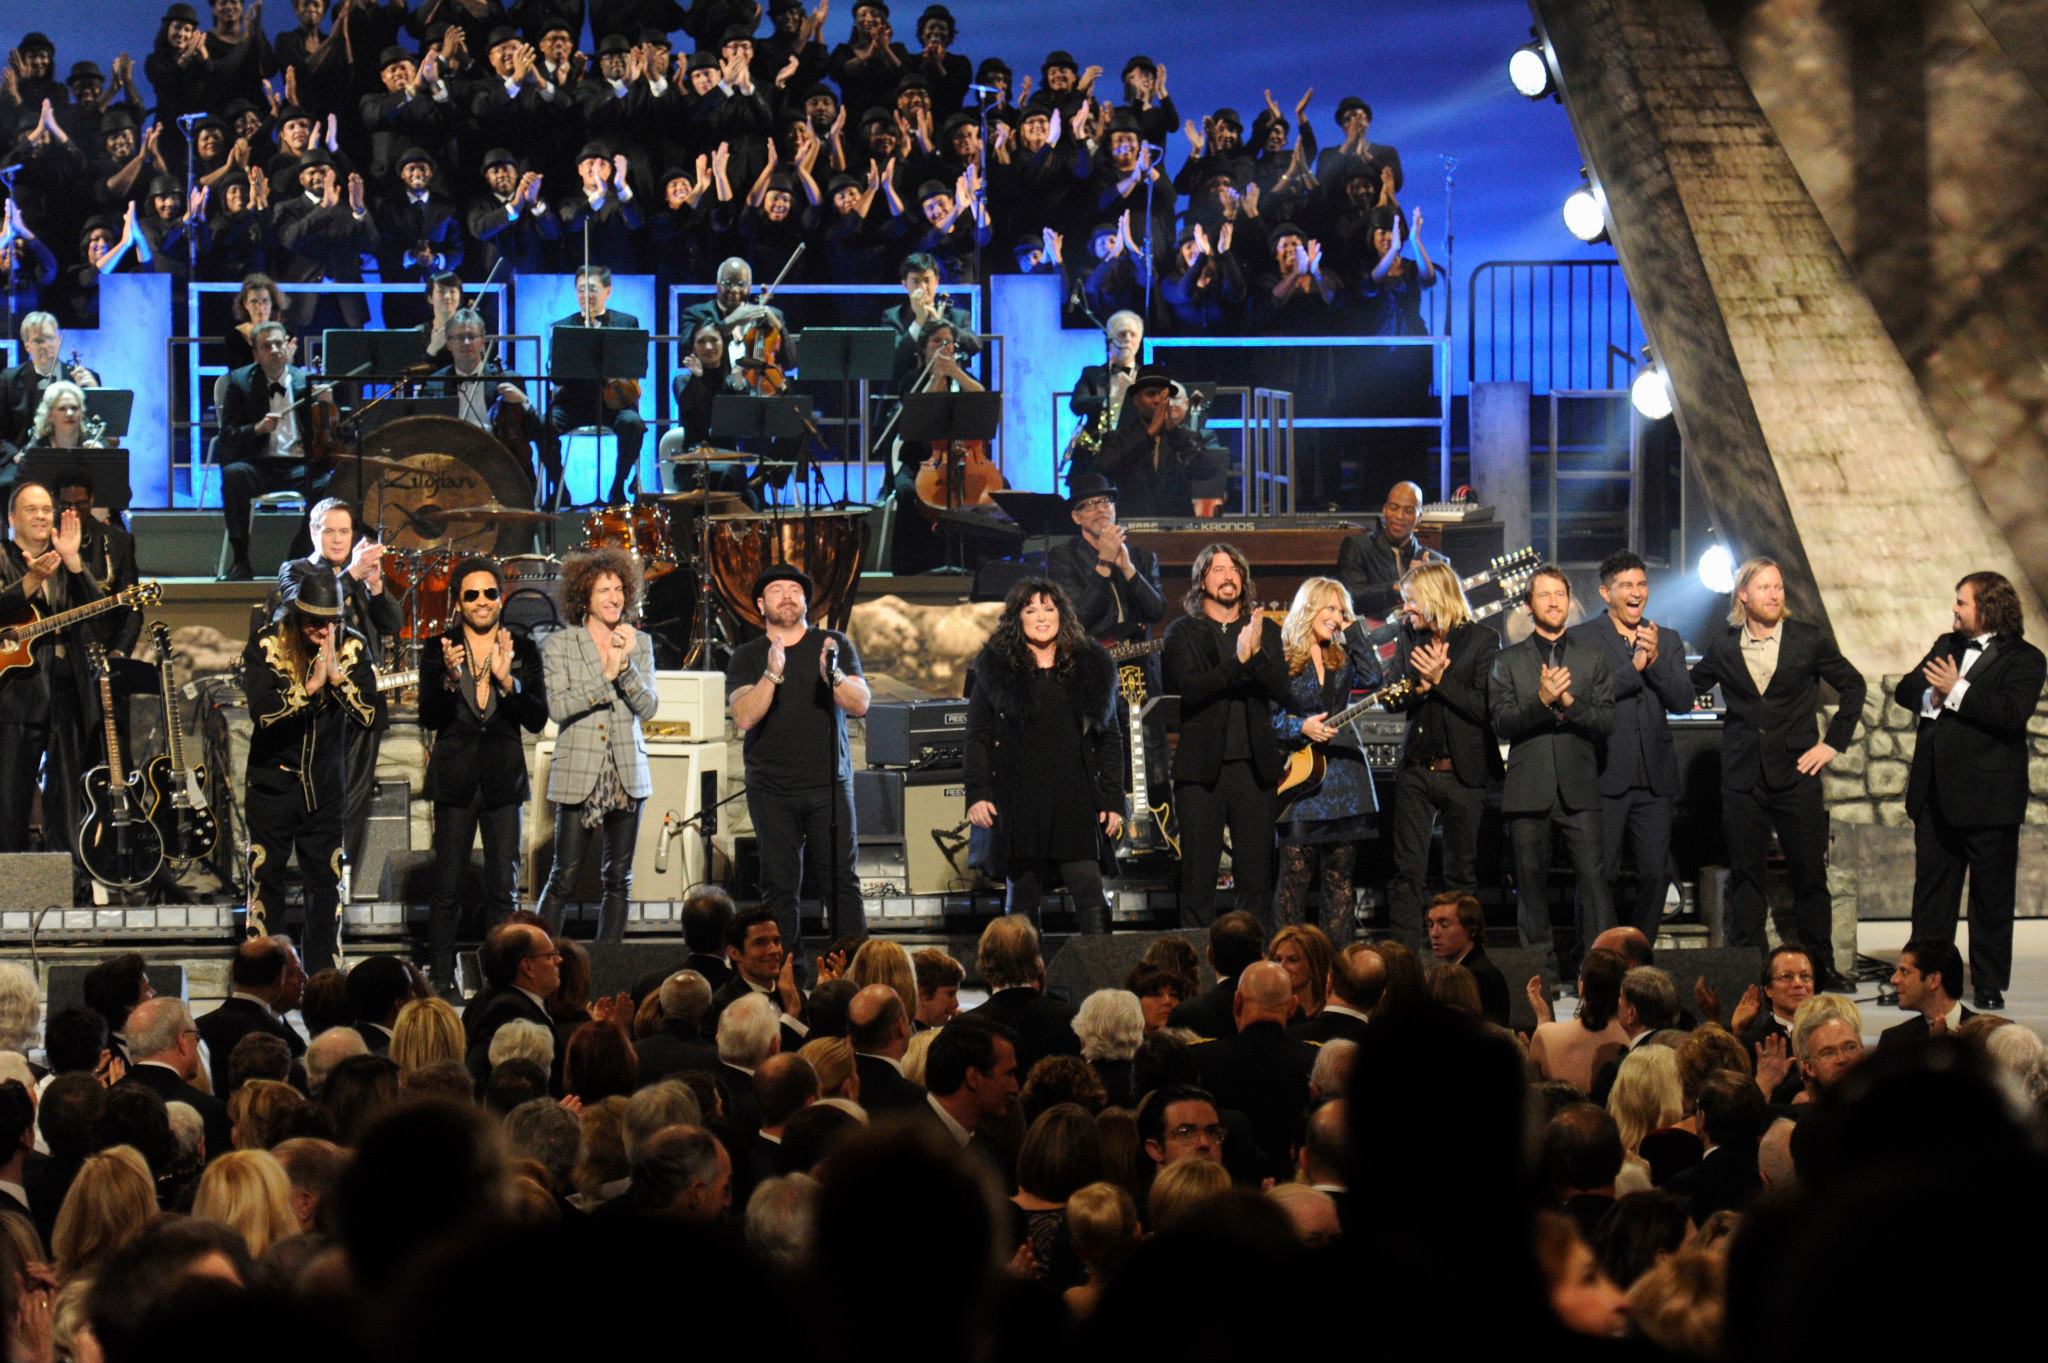 Tribute to Led Zeppelin, Kennedy Center Honors 2012, DC